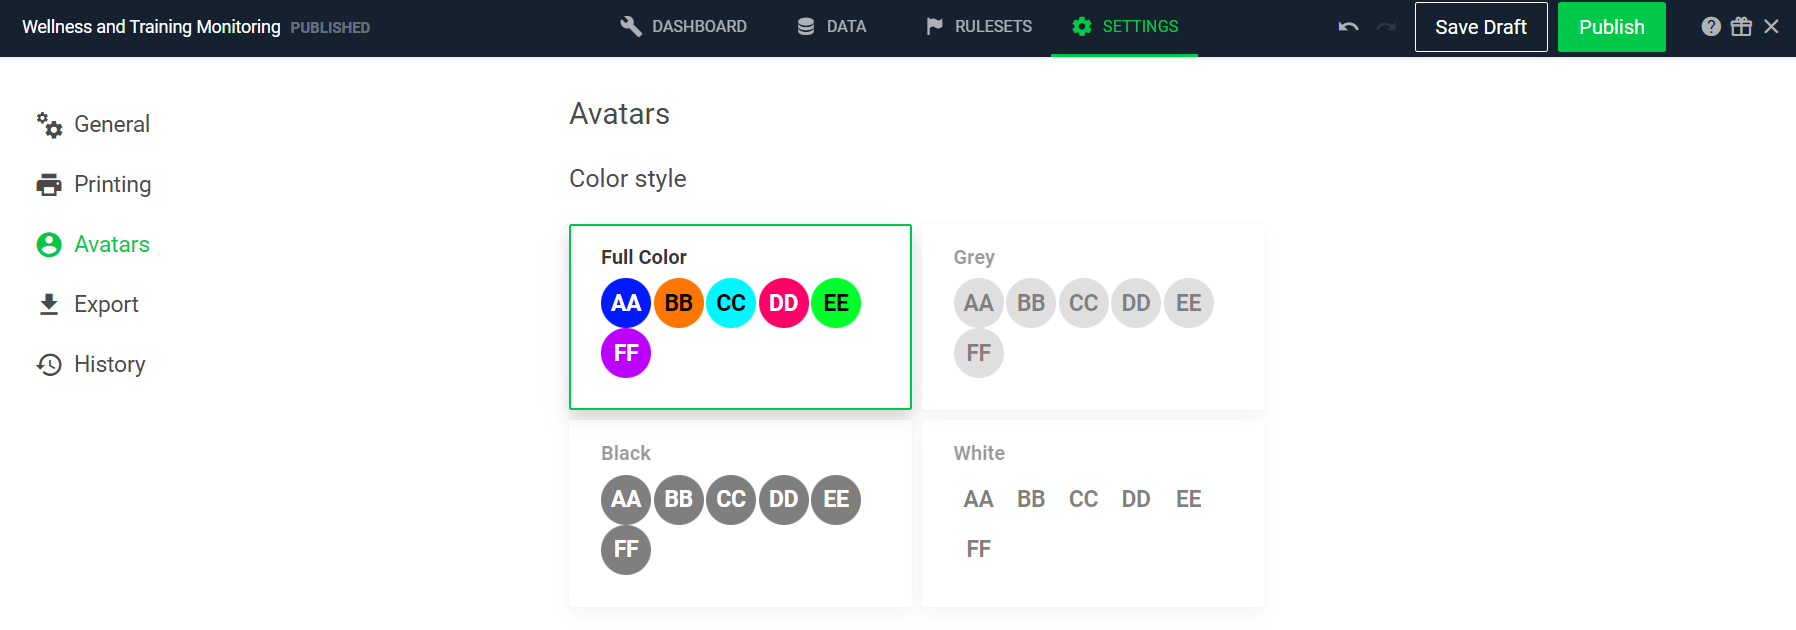 An image of the Avatar page in dashboard settings.